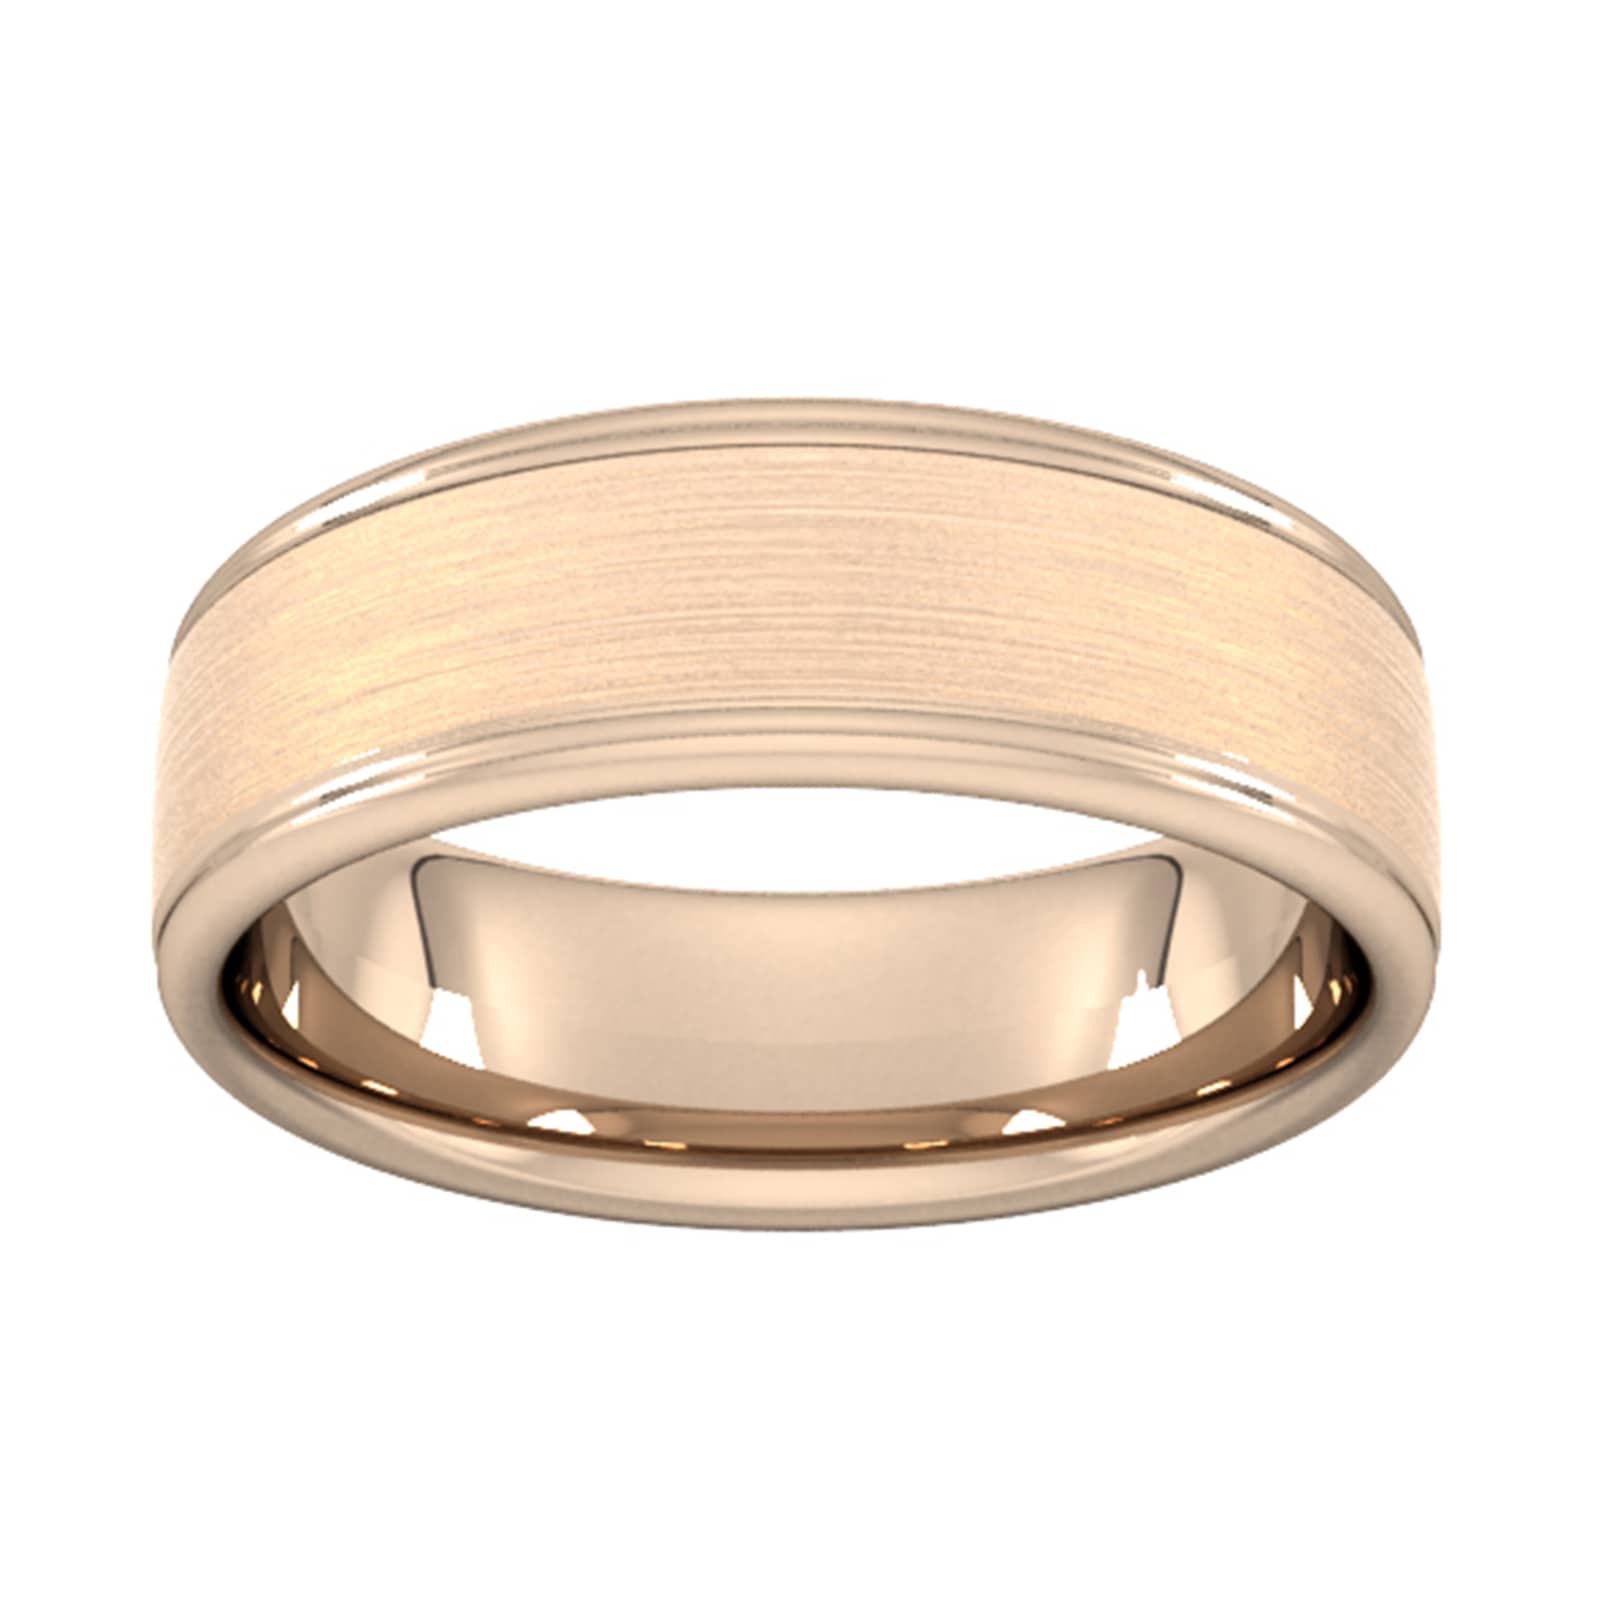 7mm Slight Court Extra Heavy Matt Centre With Grooves Wedding Ring In 18 Carat Rose Gold - Ring Size M